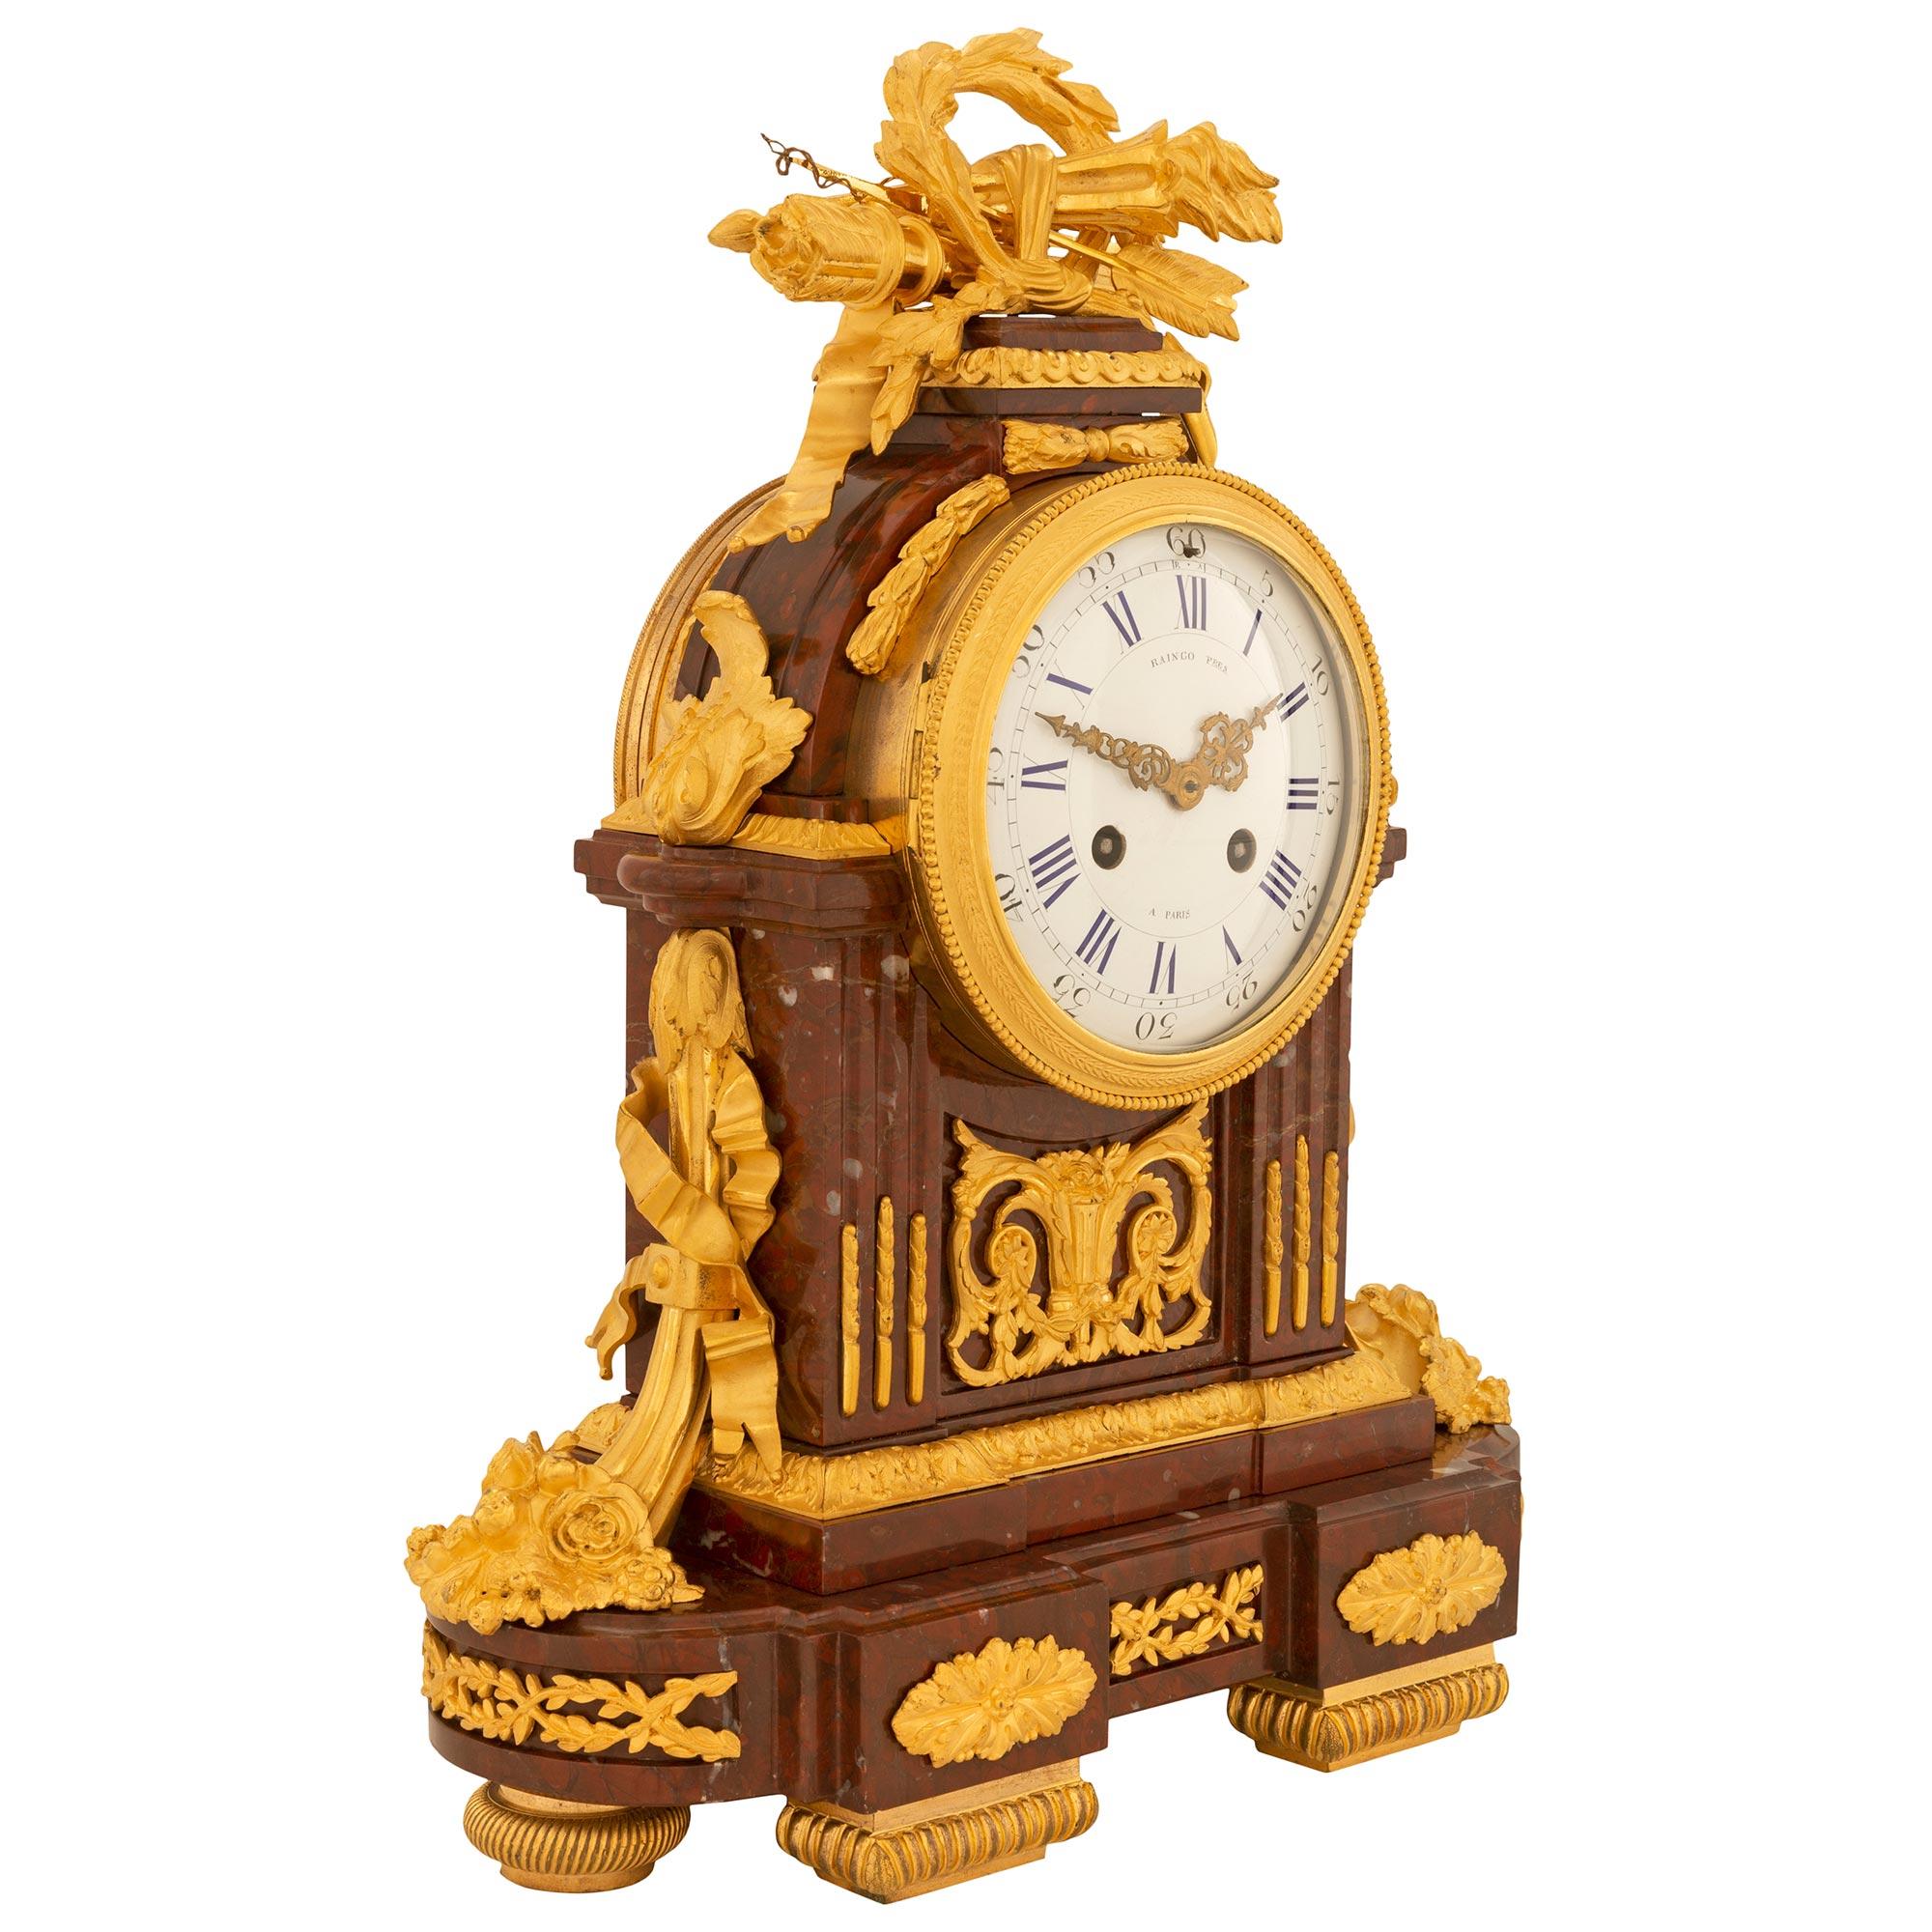 A stunning and very high quality French 19th century Louis XVI st. ormolu and Rouge Griotte marble clock signed Raingo Frères. The clock is raised by two elegant rectangular reeded supports at the front and circular spiral fluted feet behind below